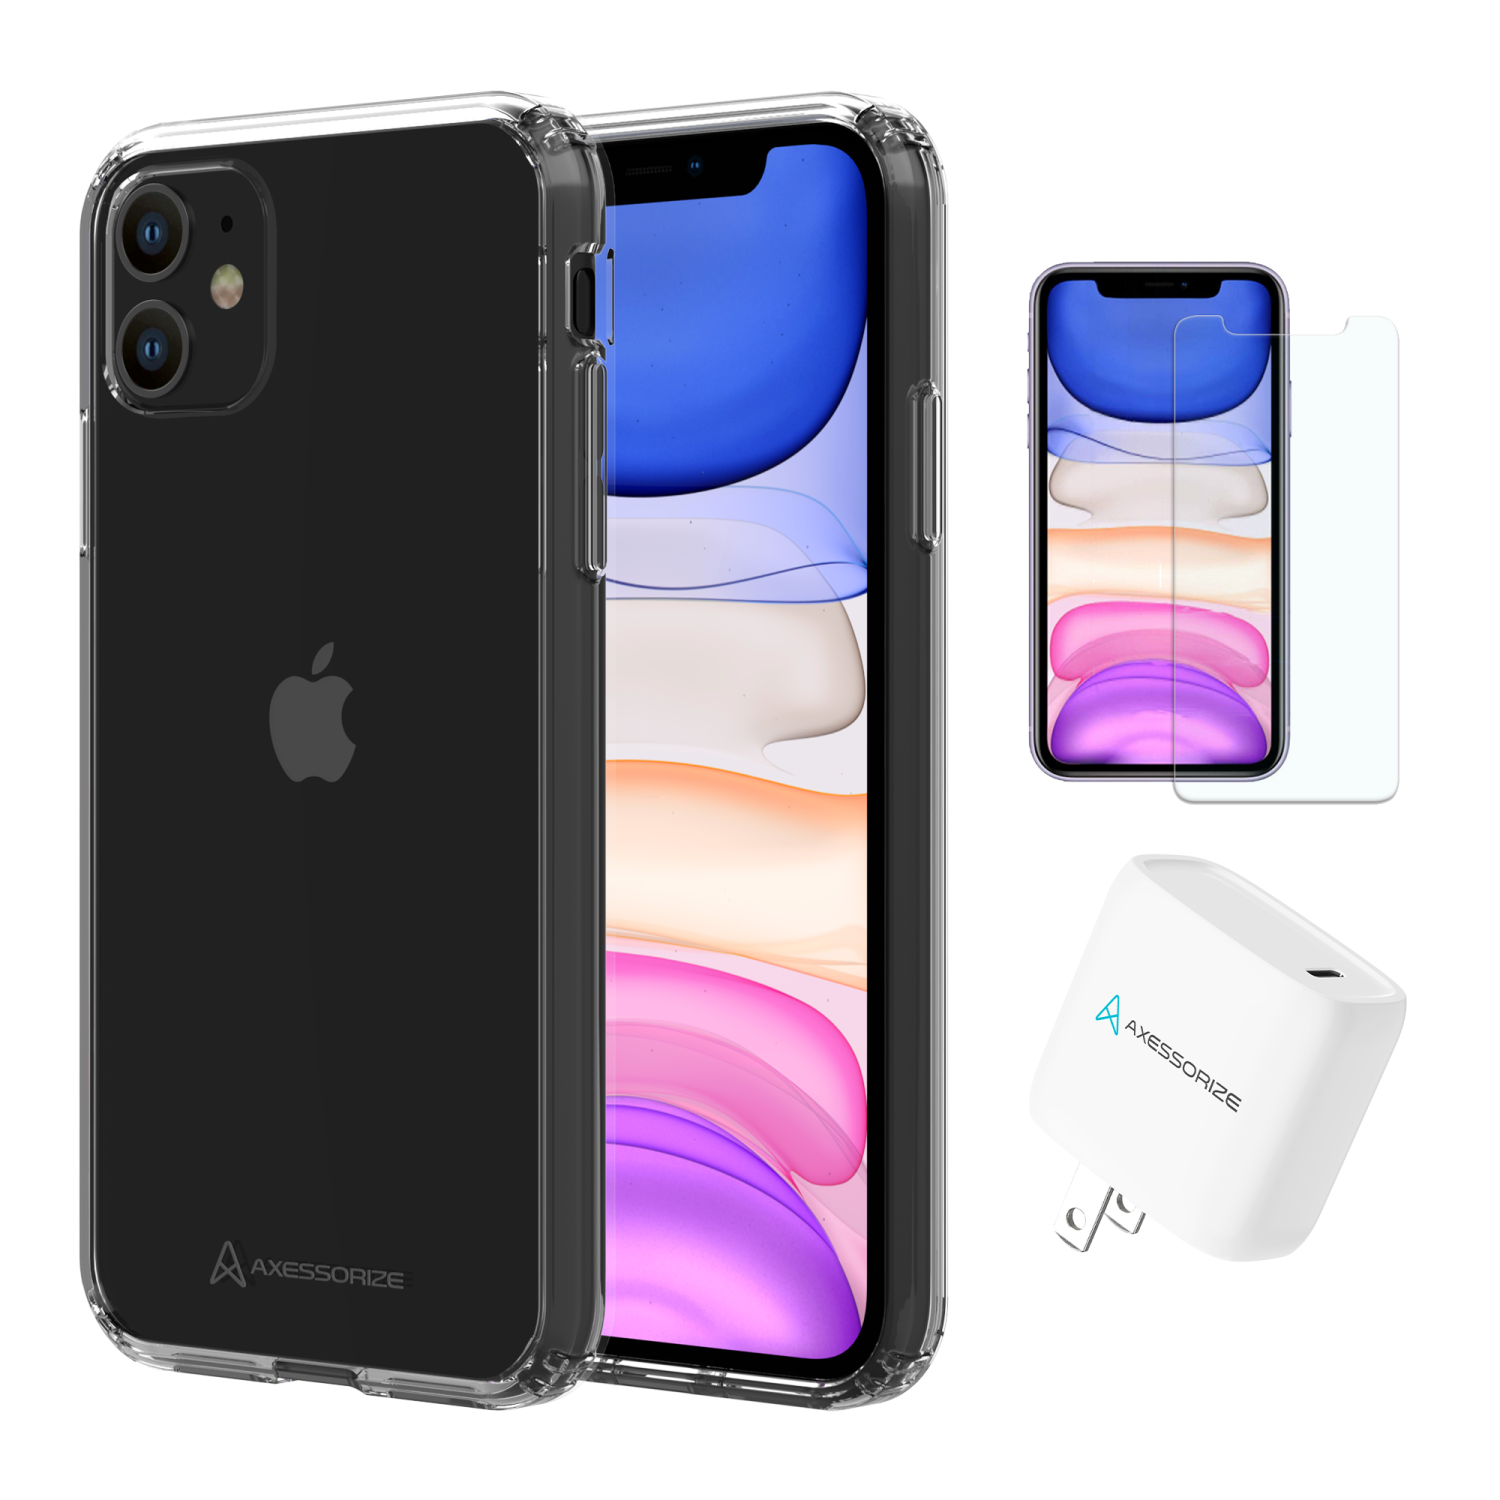 Axessorize Starter Kit bundle | Ultra Clear Case, Screen Protector and 20w Charger for Apple iPhone XR/11